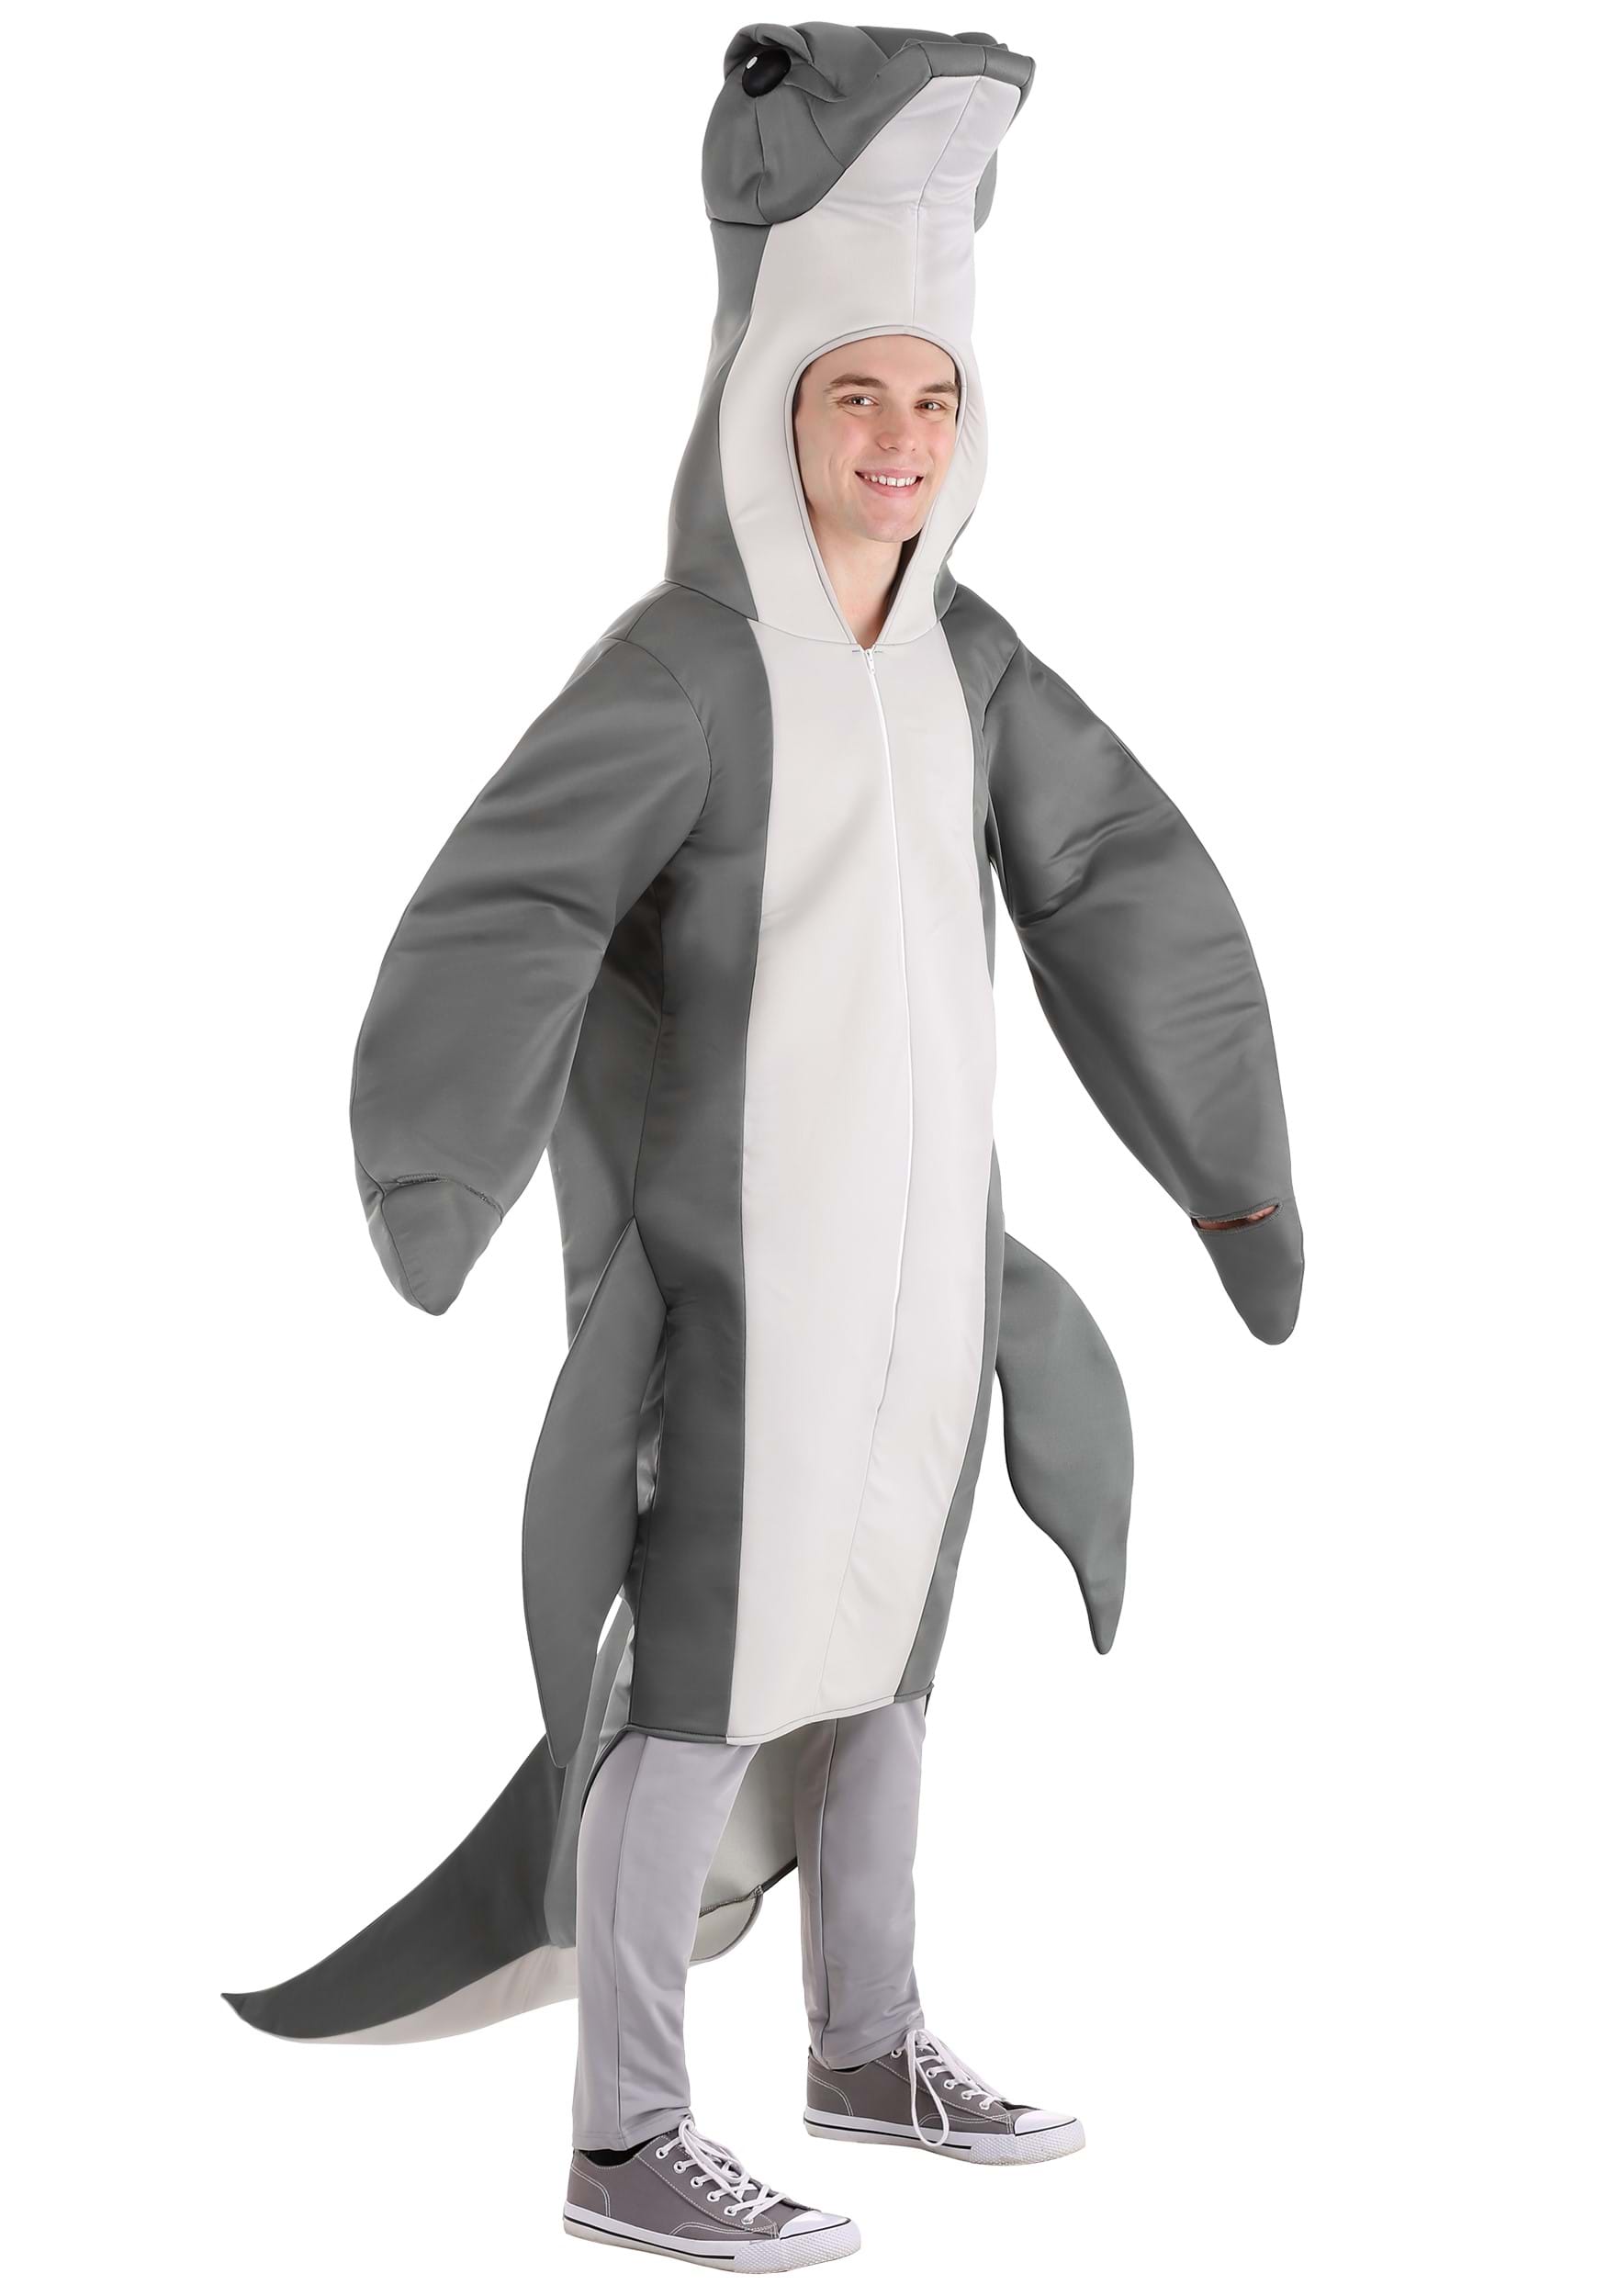 Photos - Fancy Dress Monster FUN Costumes Loch Ness  Costume for Adults Gray 